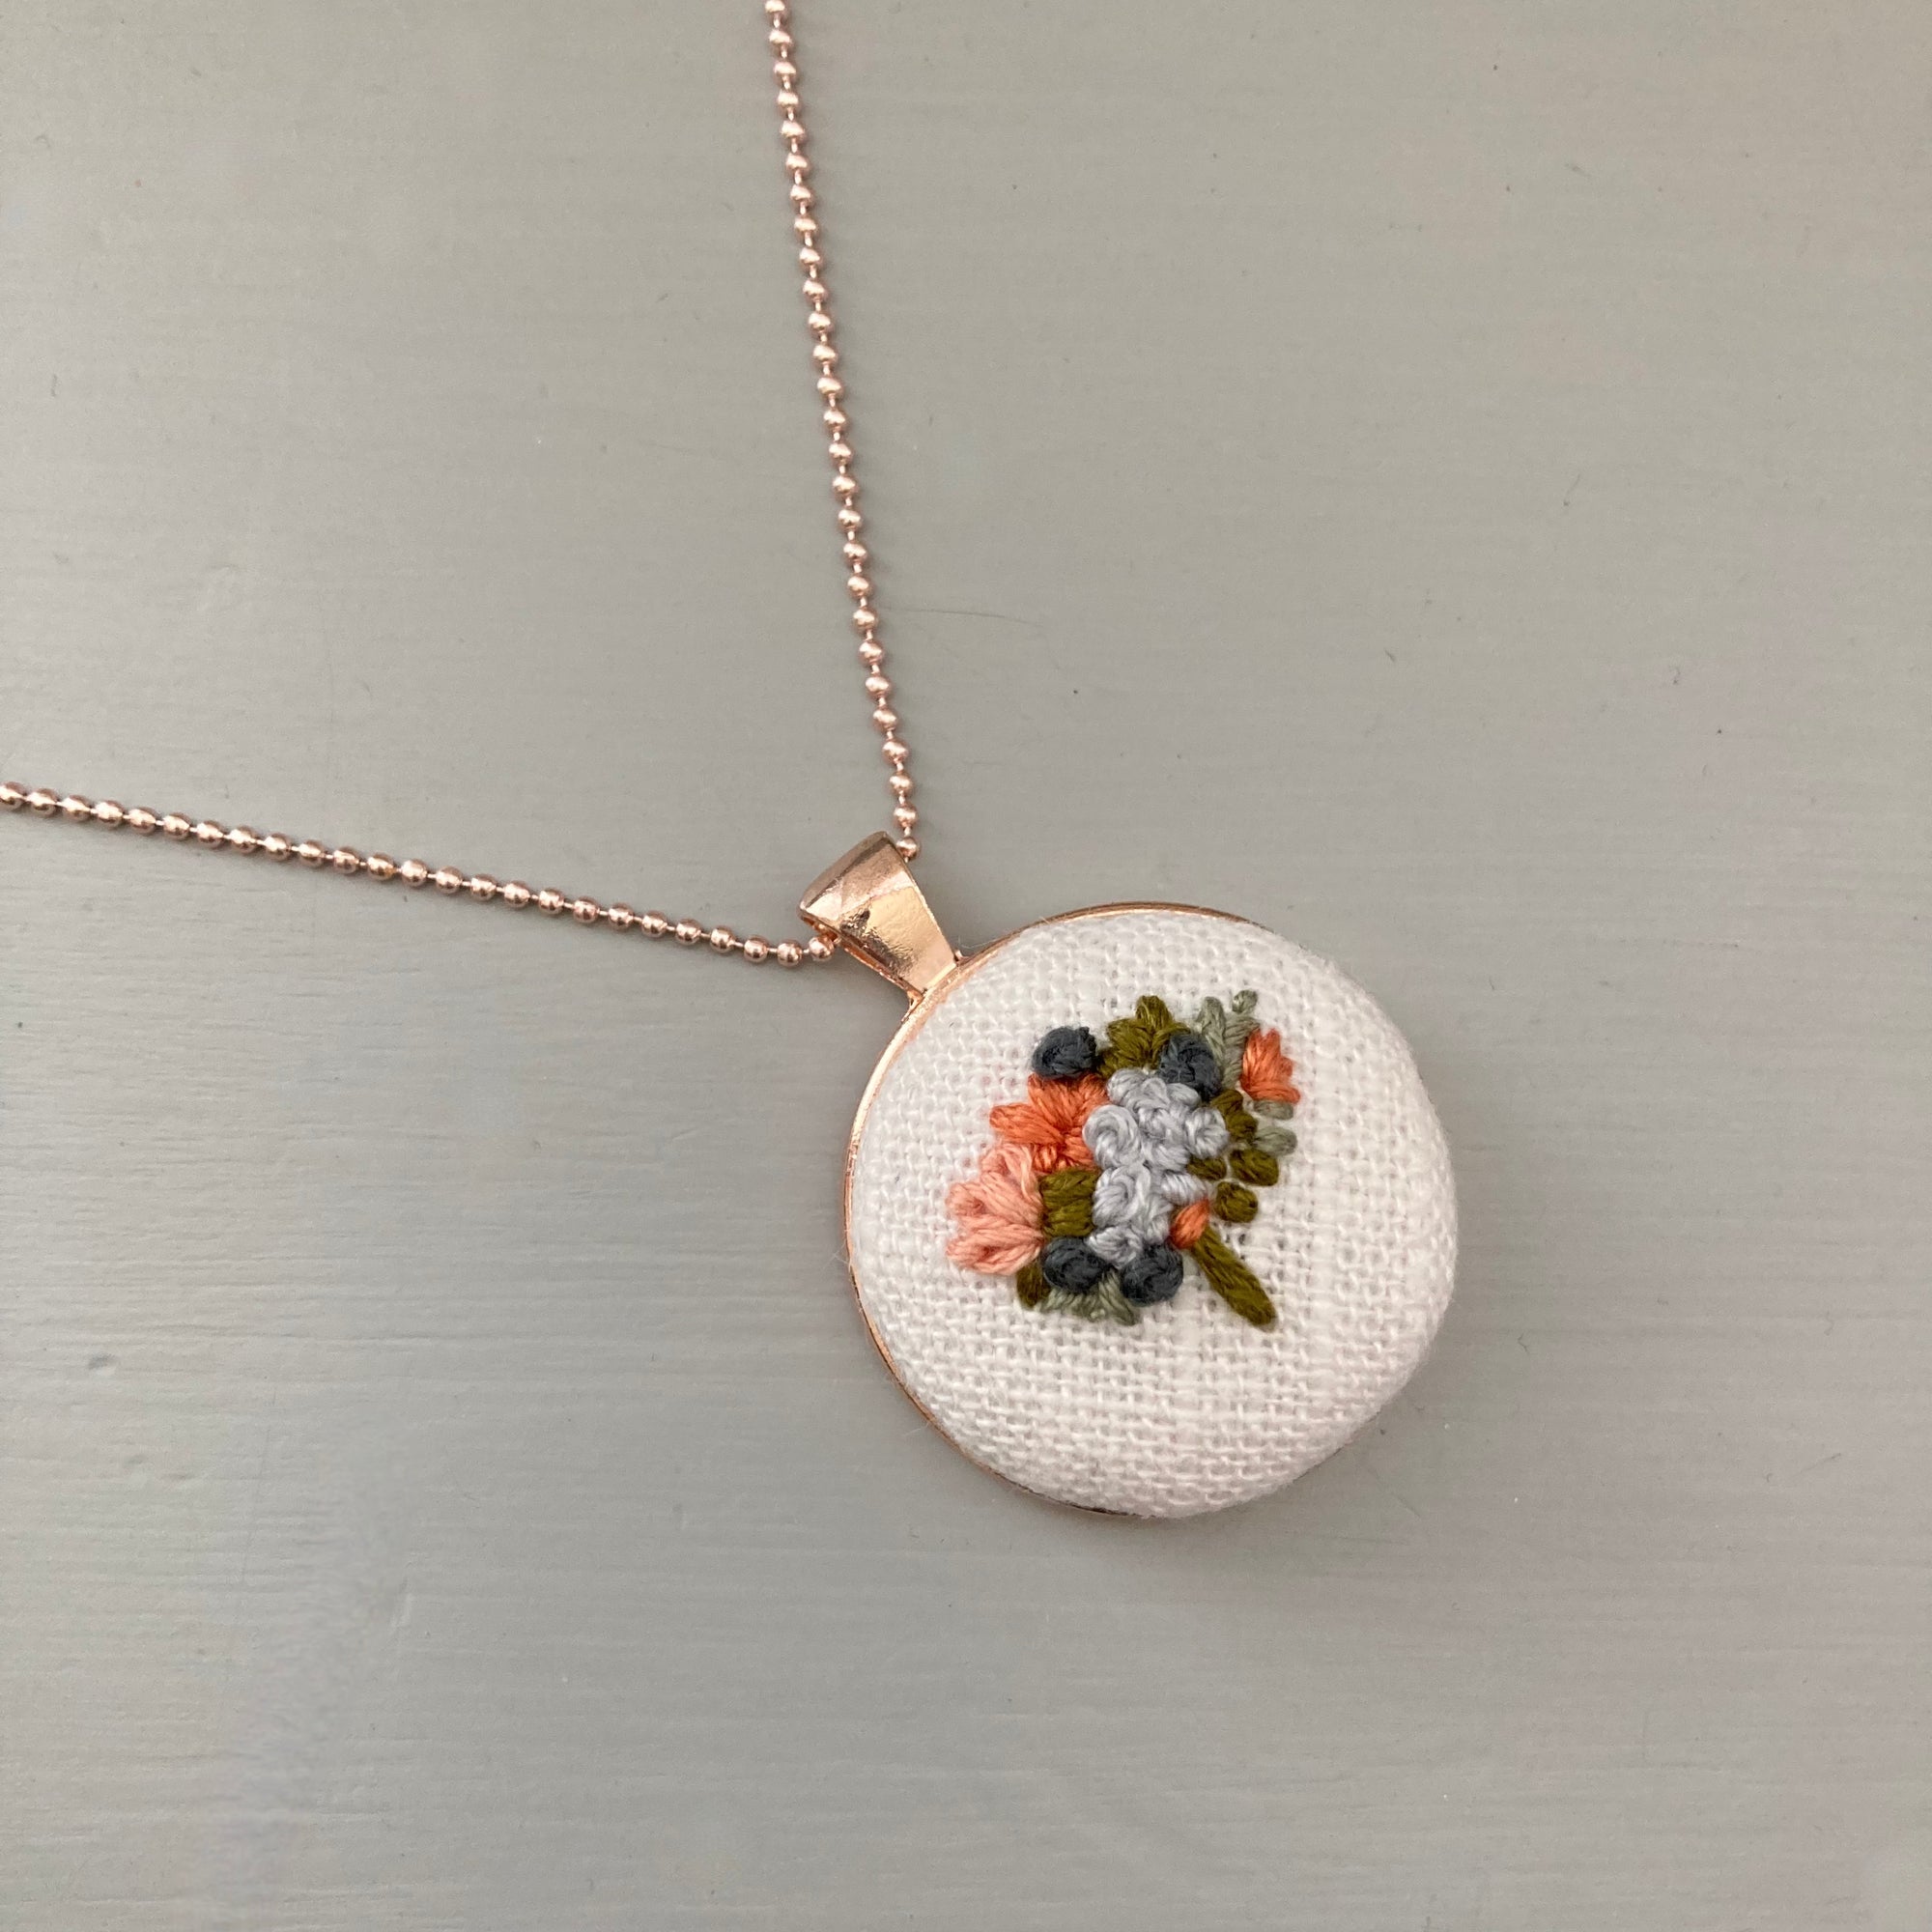 Hand Embroidered Gift for the Modern Romantic - Hand stitched floral necklace by And Other Adventures Embroidery Co